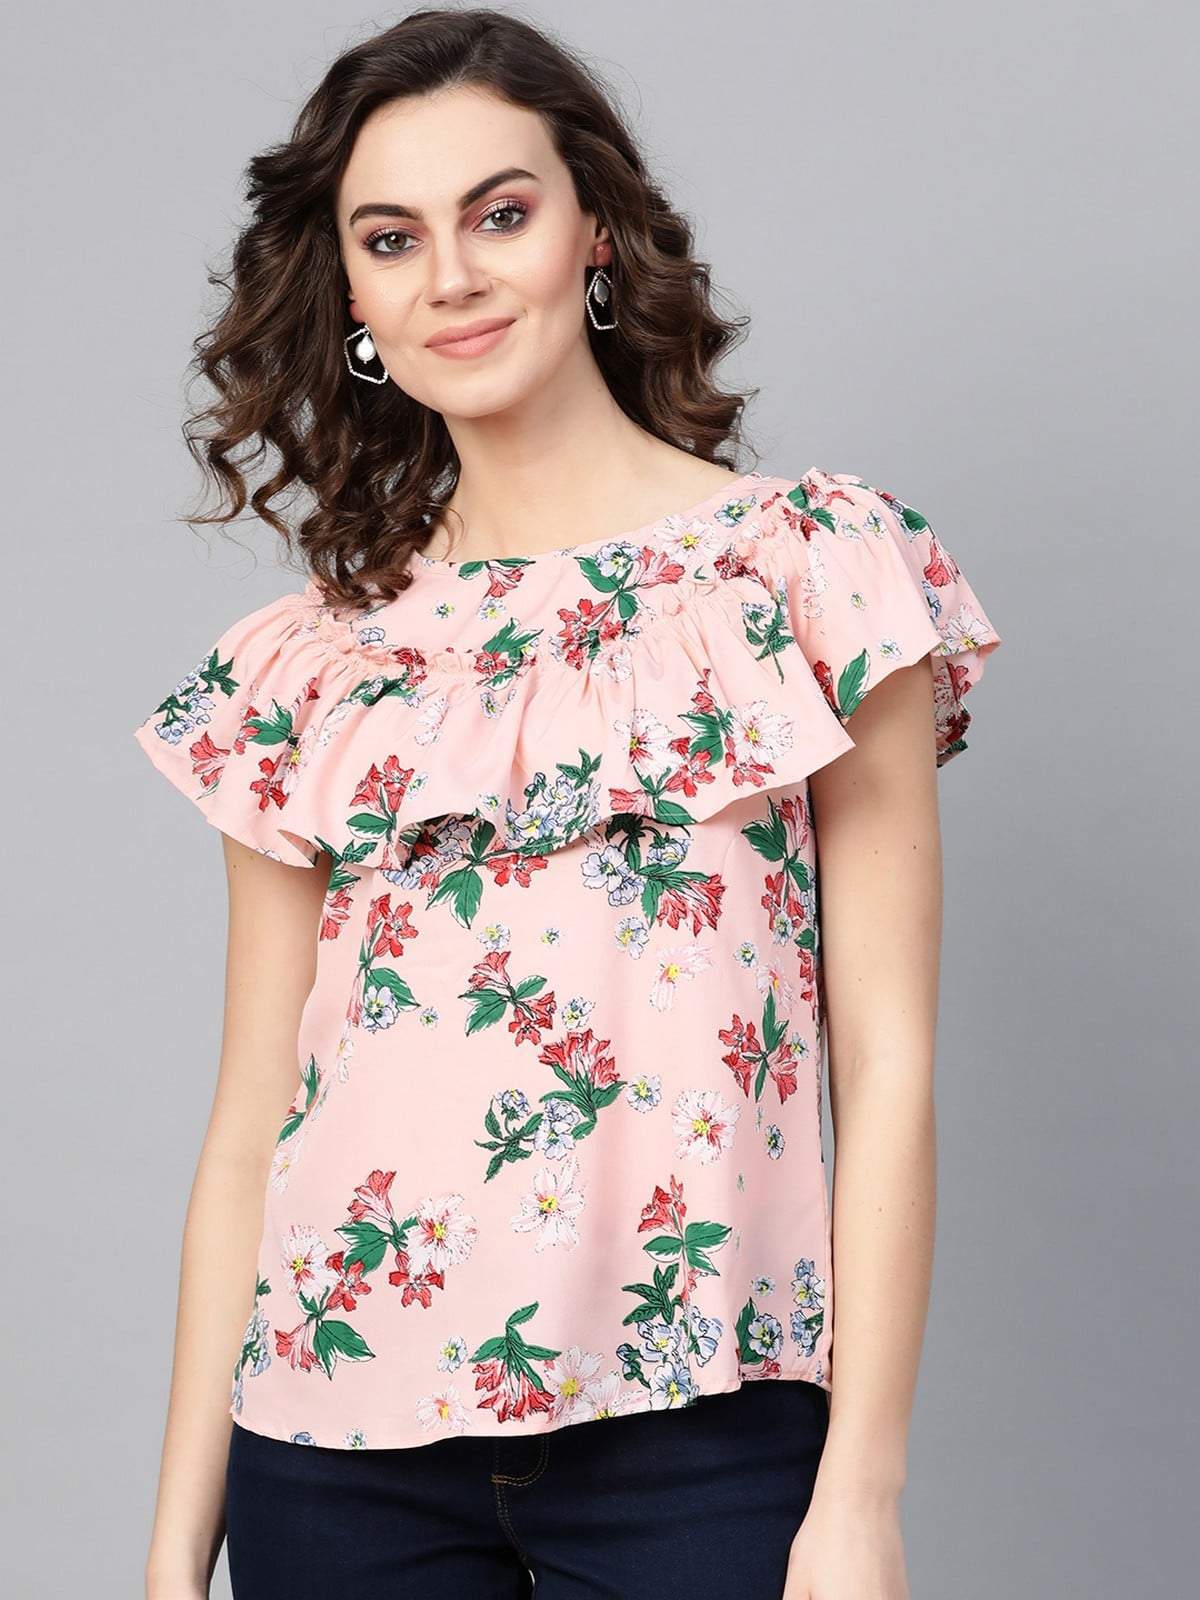 Women's Floral Top With Gathered Neck Flare - Pannkh